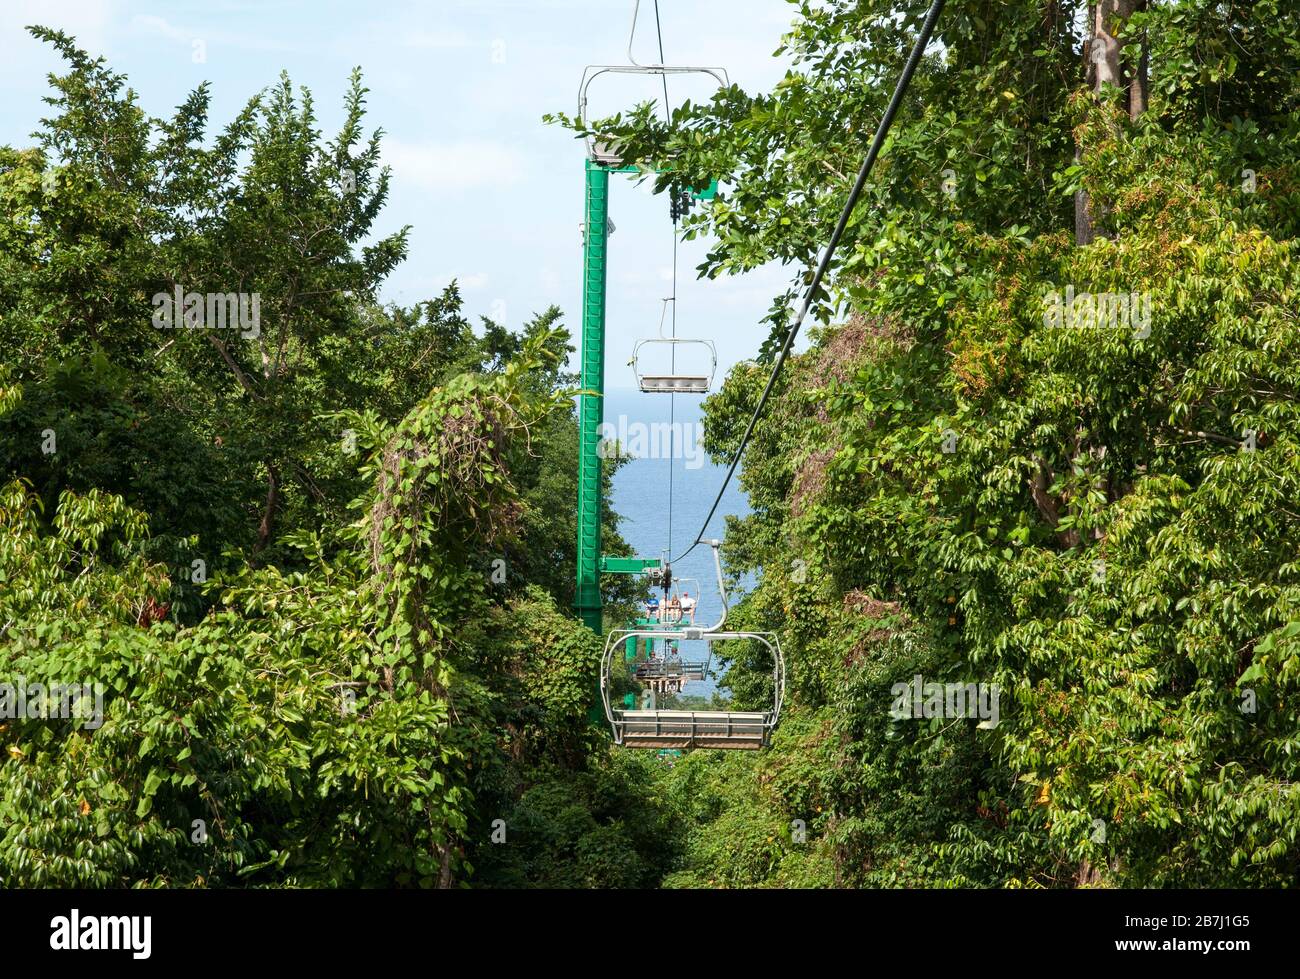 The view of a cable transporting tourists from Ocho Rios downtown to the top of Mystic Mountain (Jamaica). Stock Photo